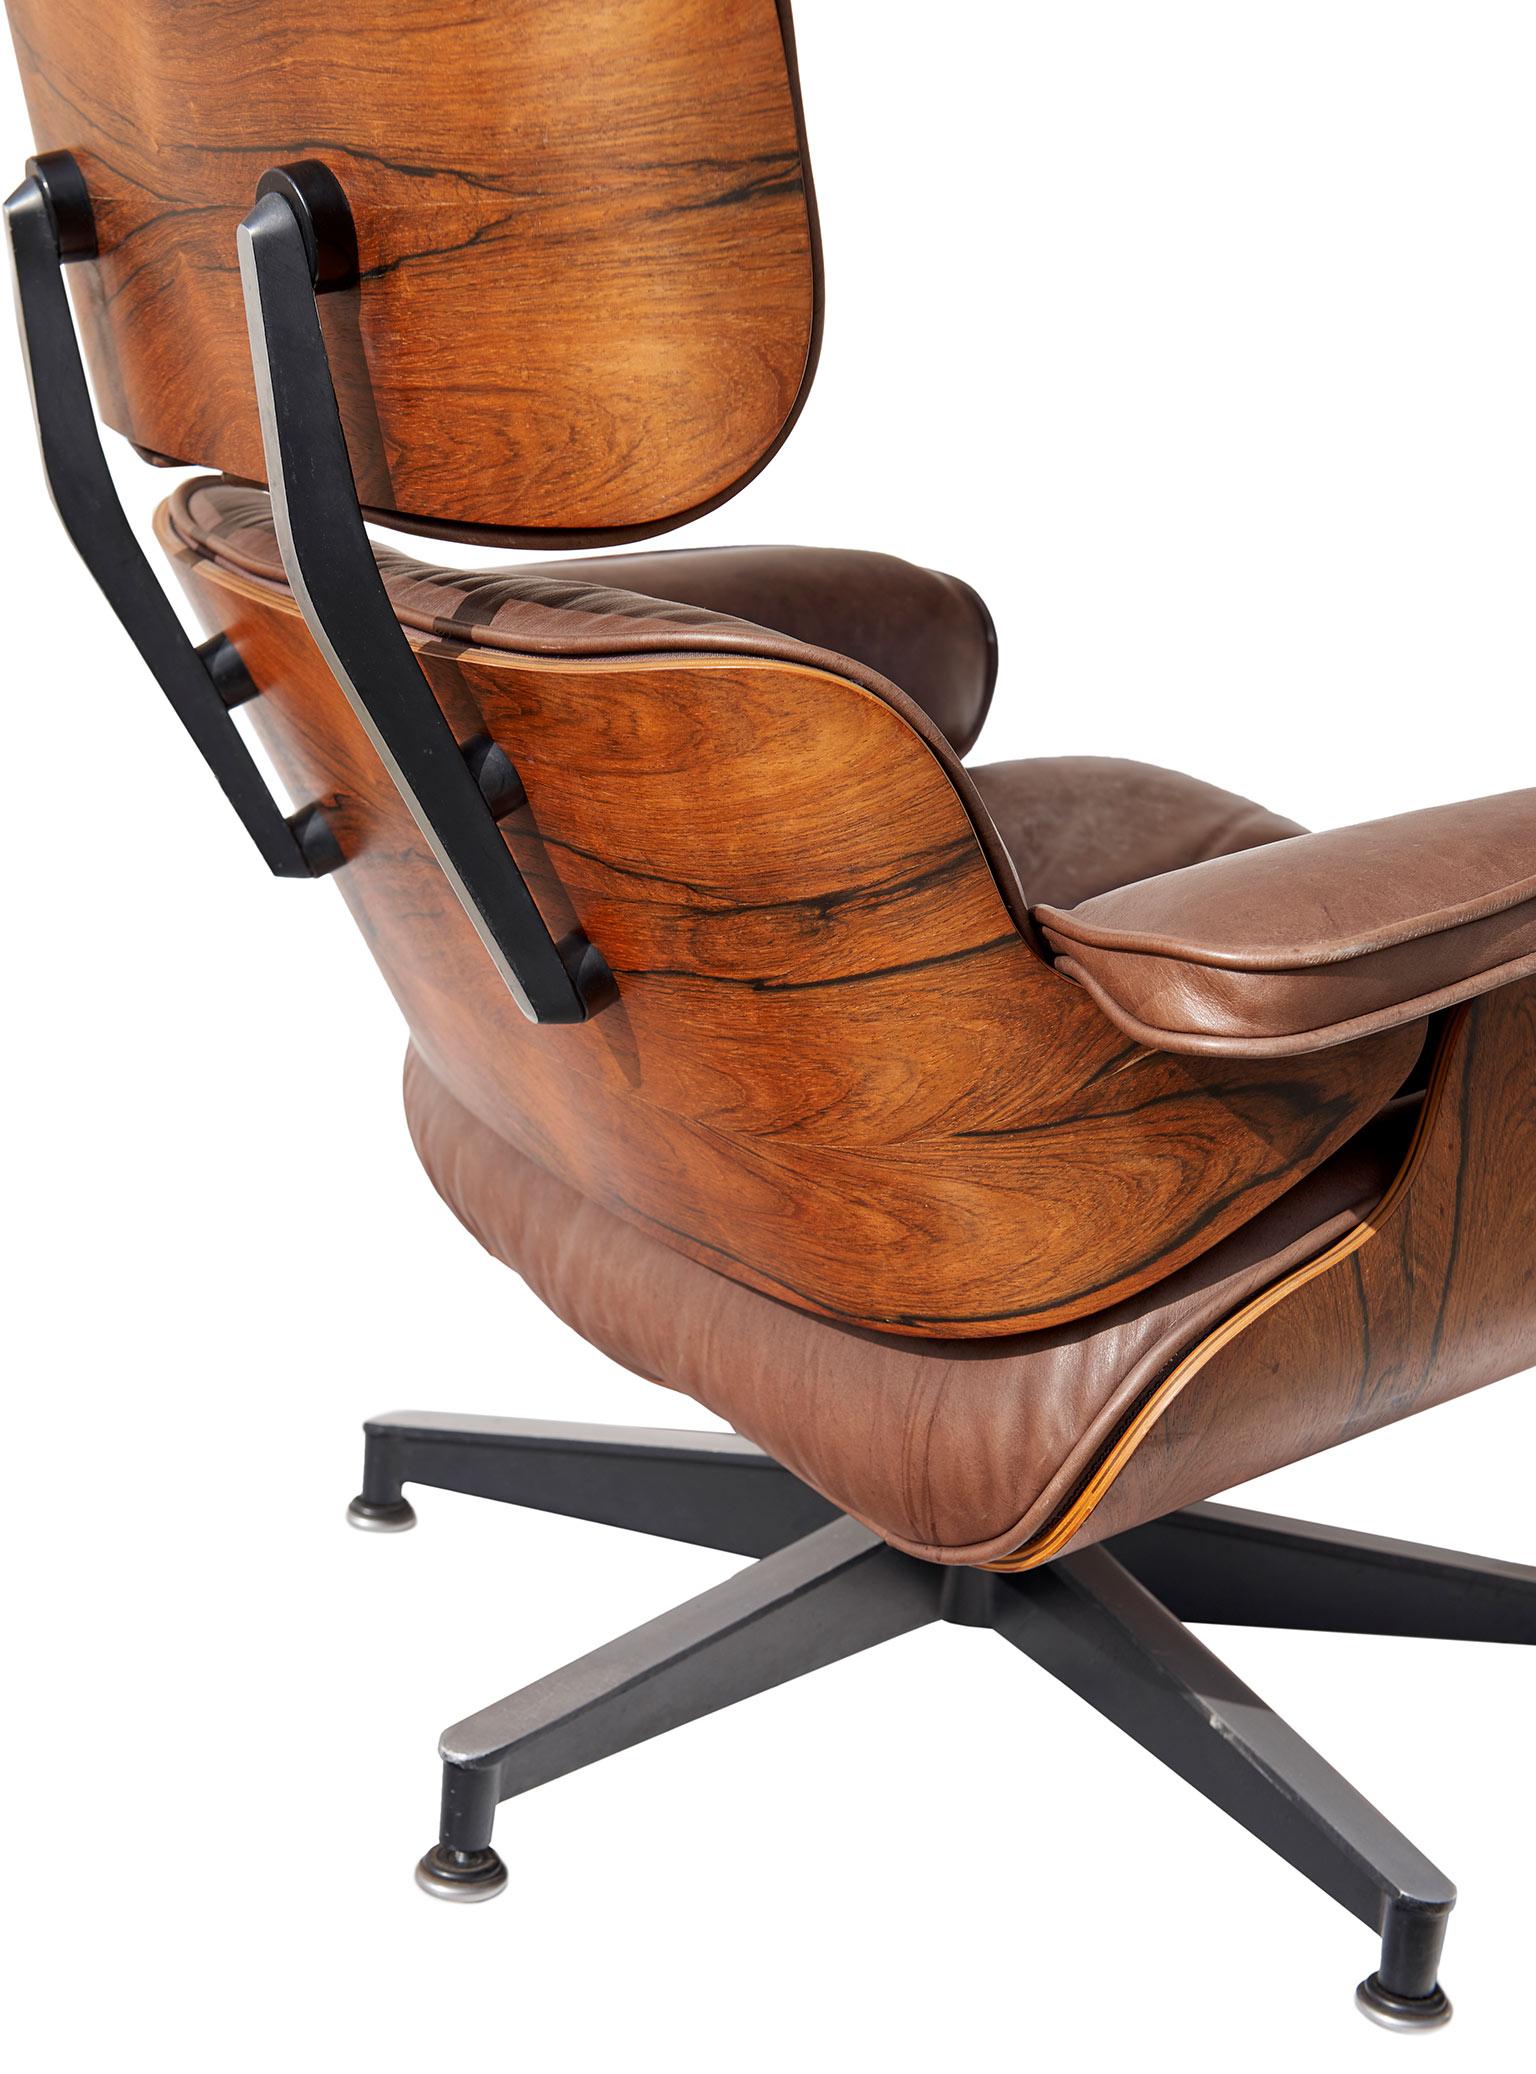 Veneer Lounge Chair and Ottoman by Charles and Ray Eames